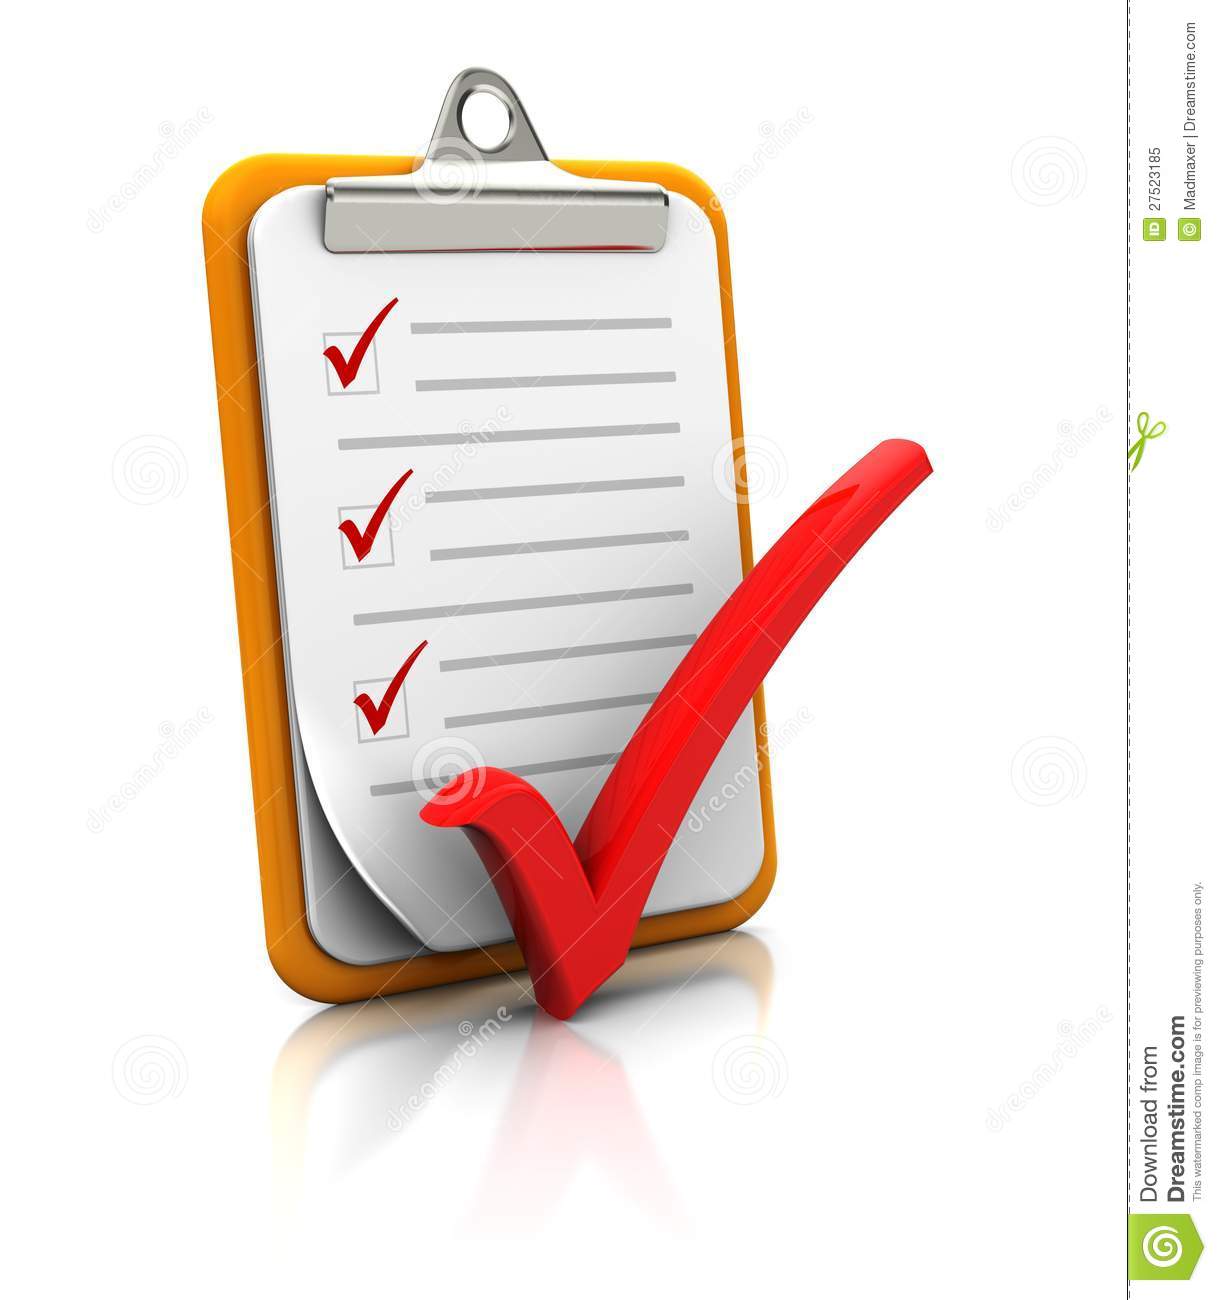 Clipboard With Checklist Royalty Free Stock Photo   Image  27523185